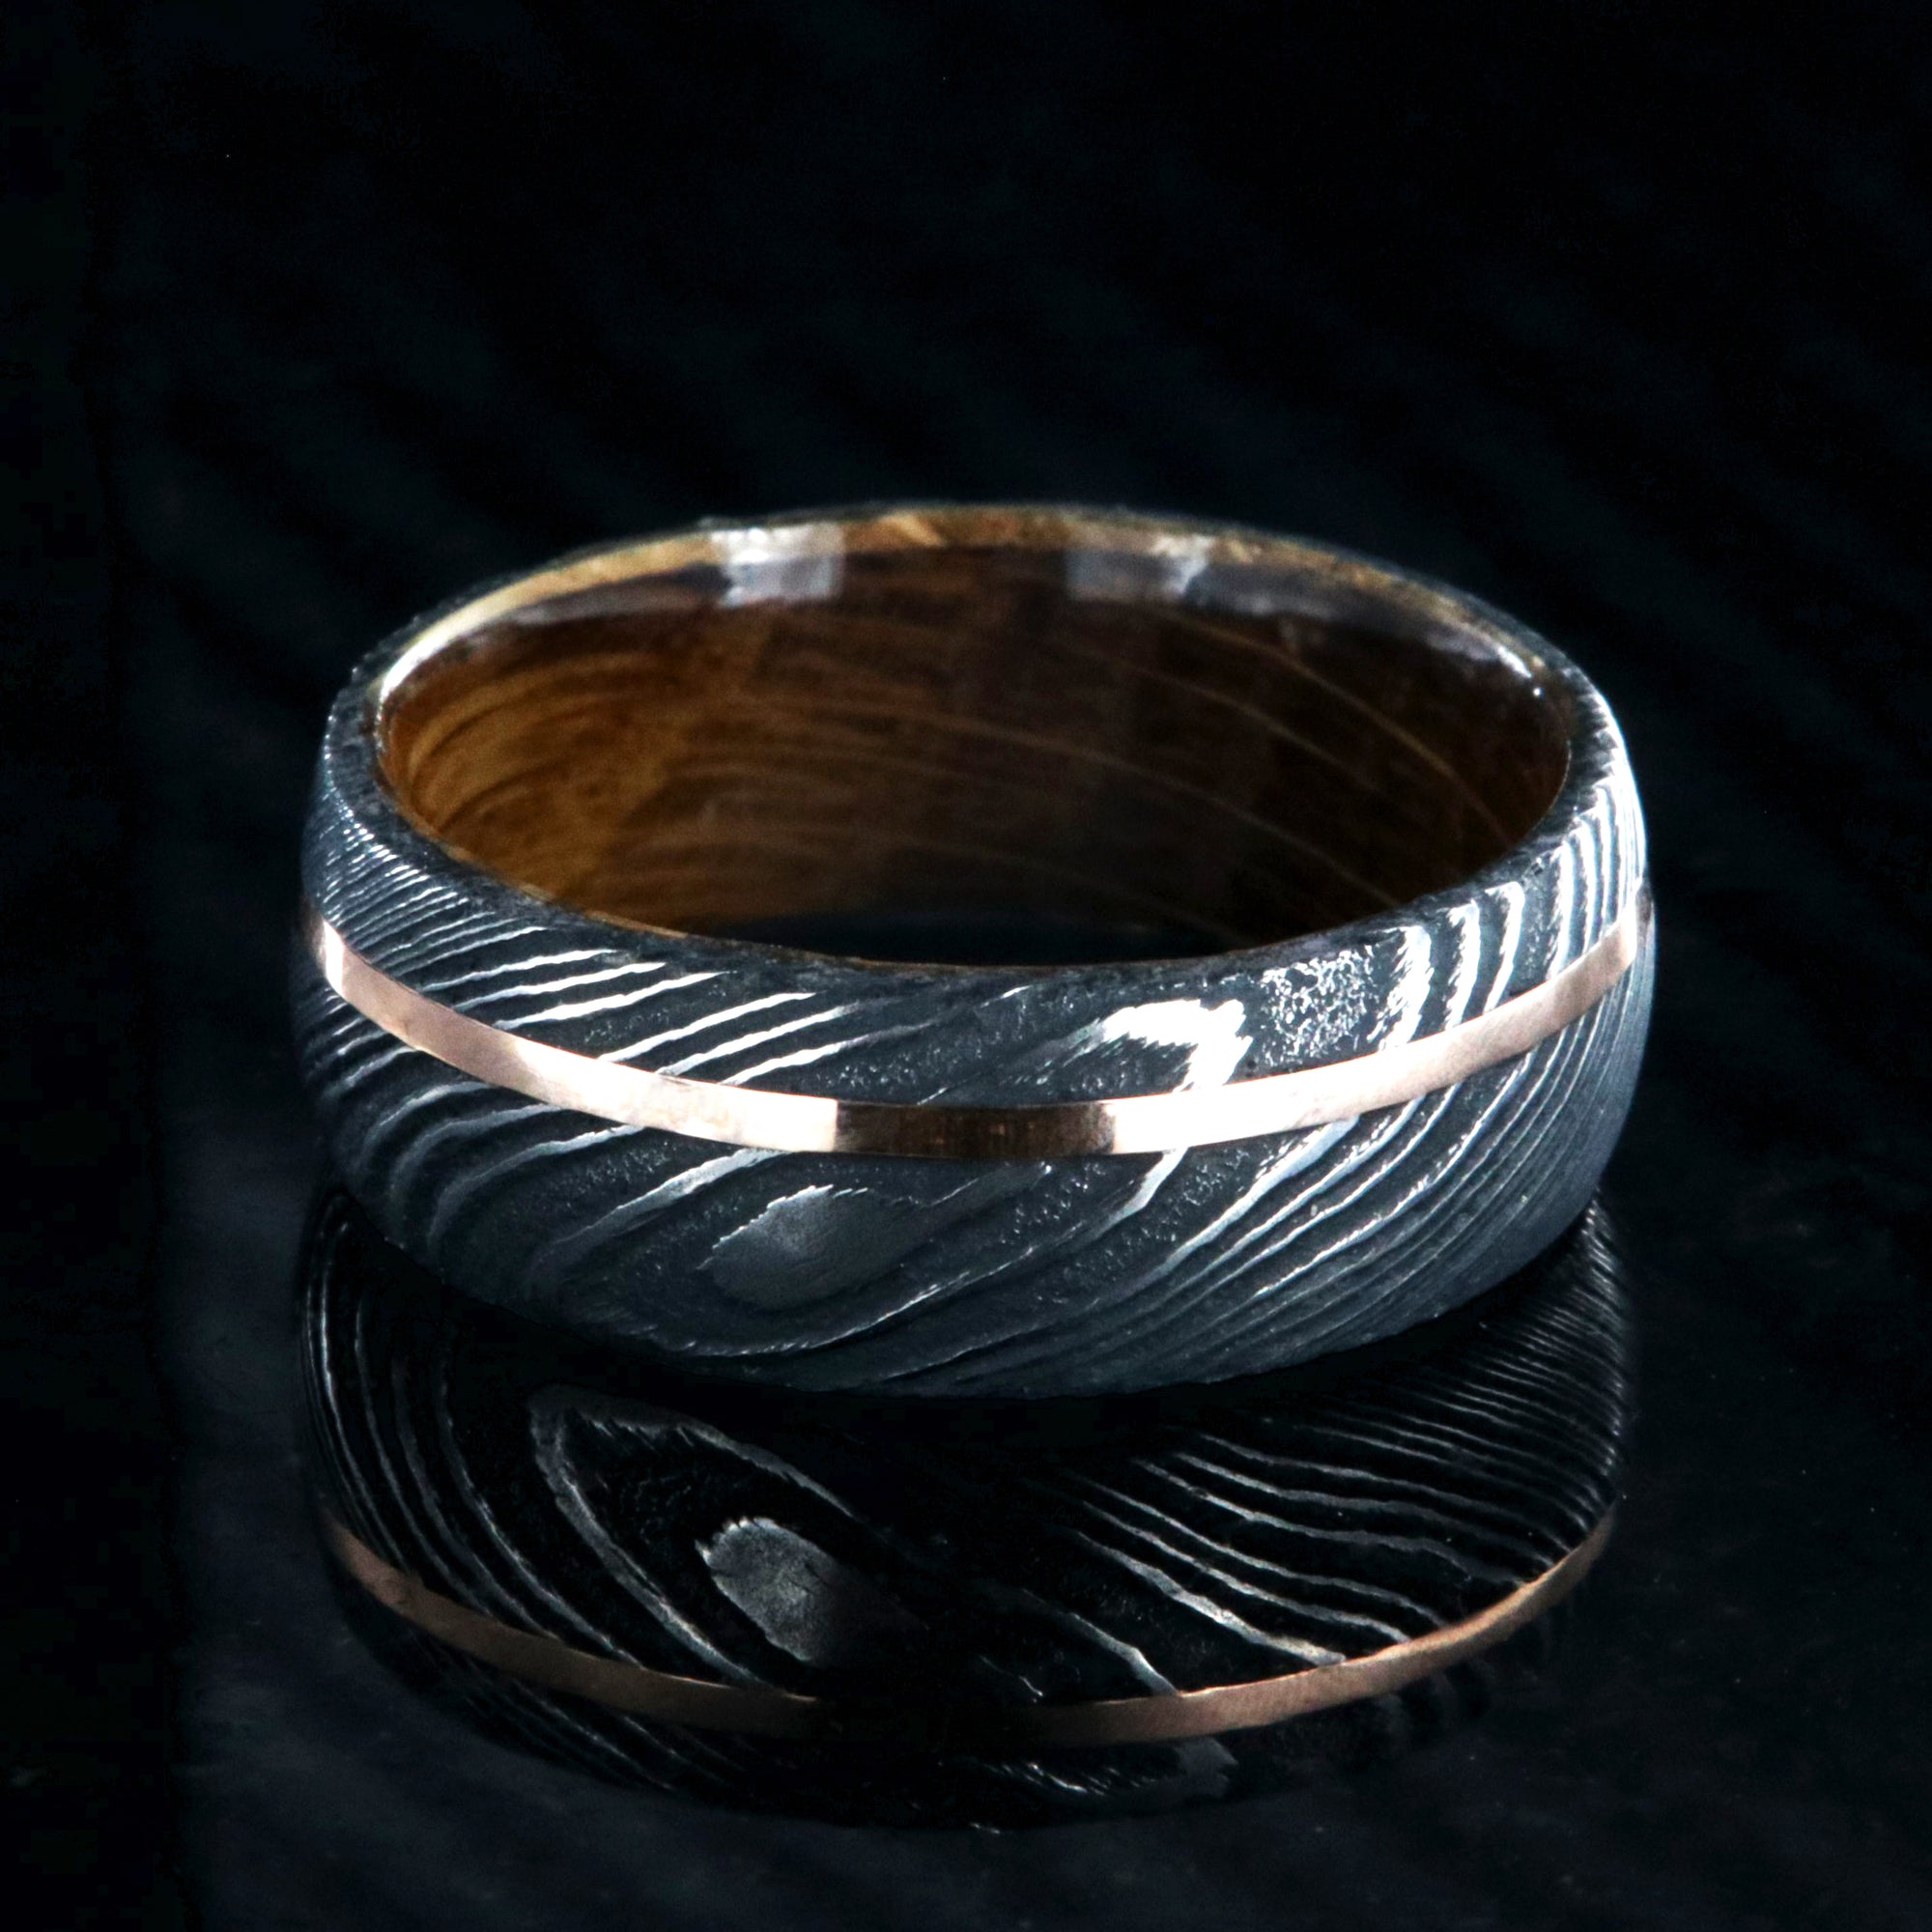 8mm wide black Damascus steel wedding ring with an off-centered rose gold inlay and a Jack Daniel's whiskey barrel sleeve